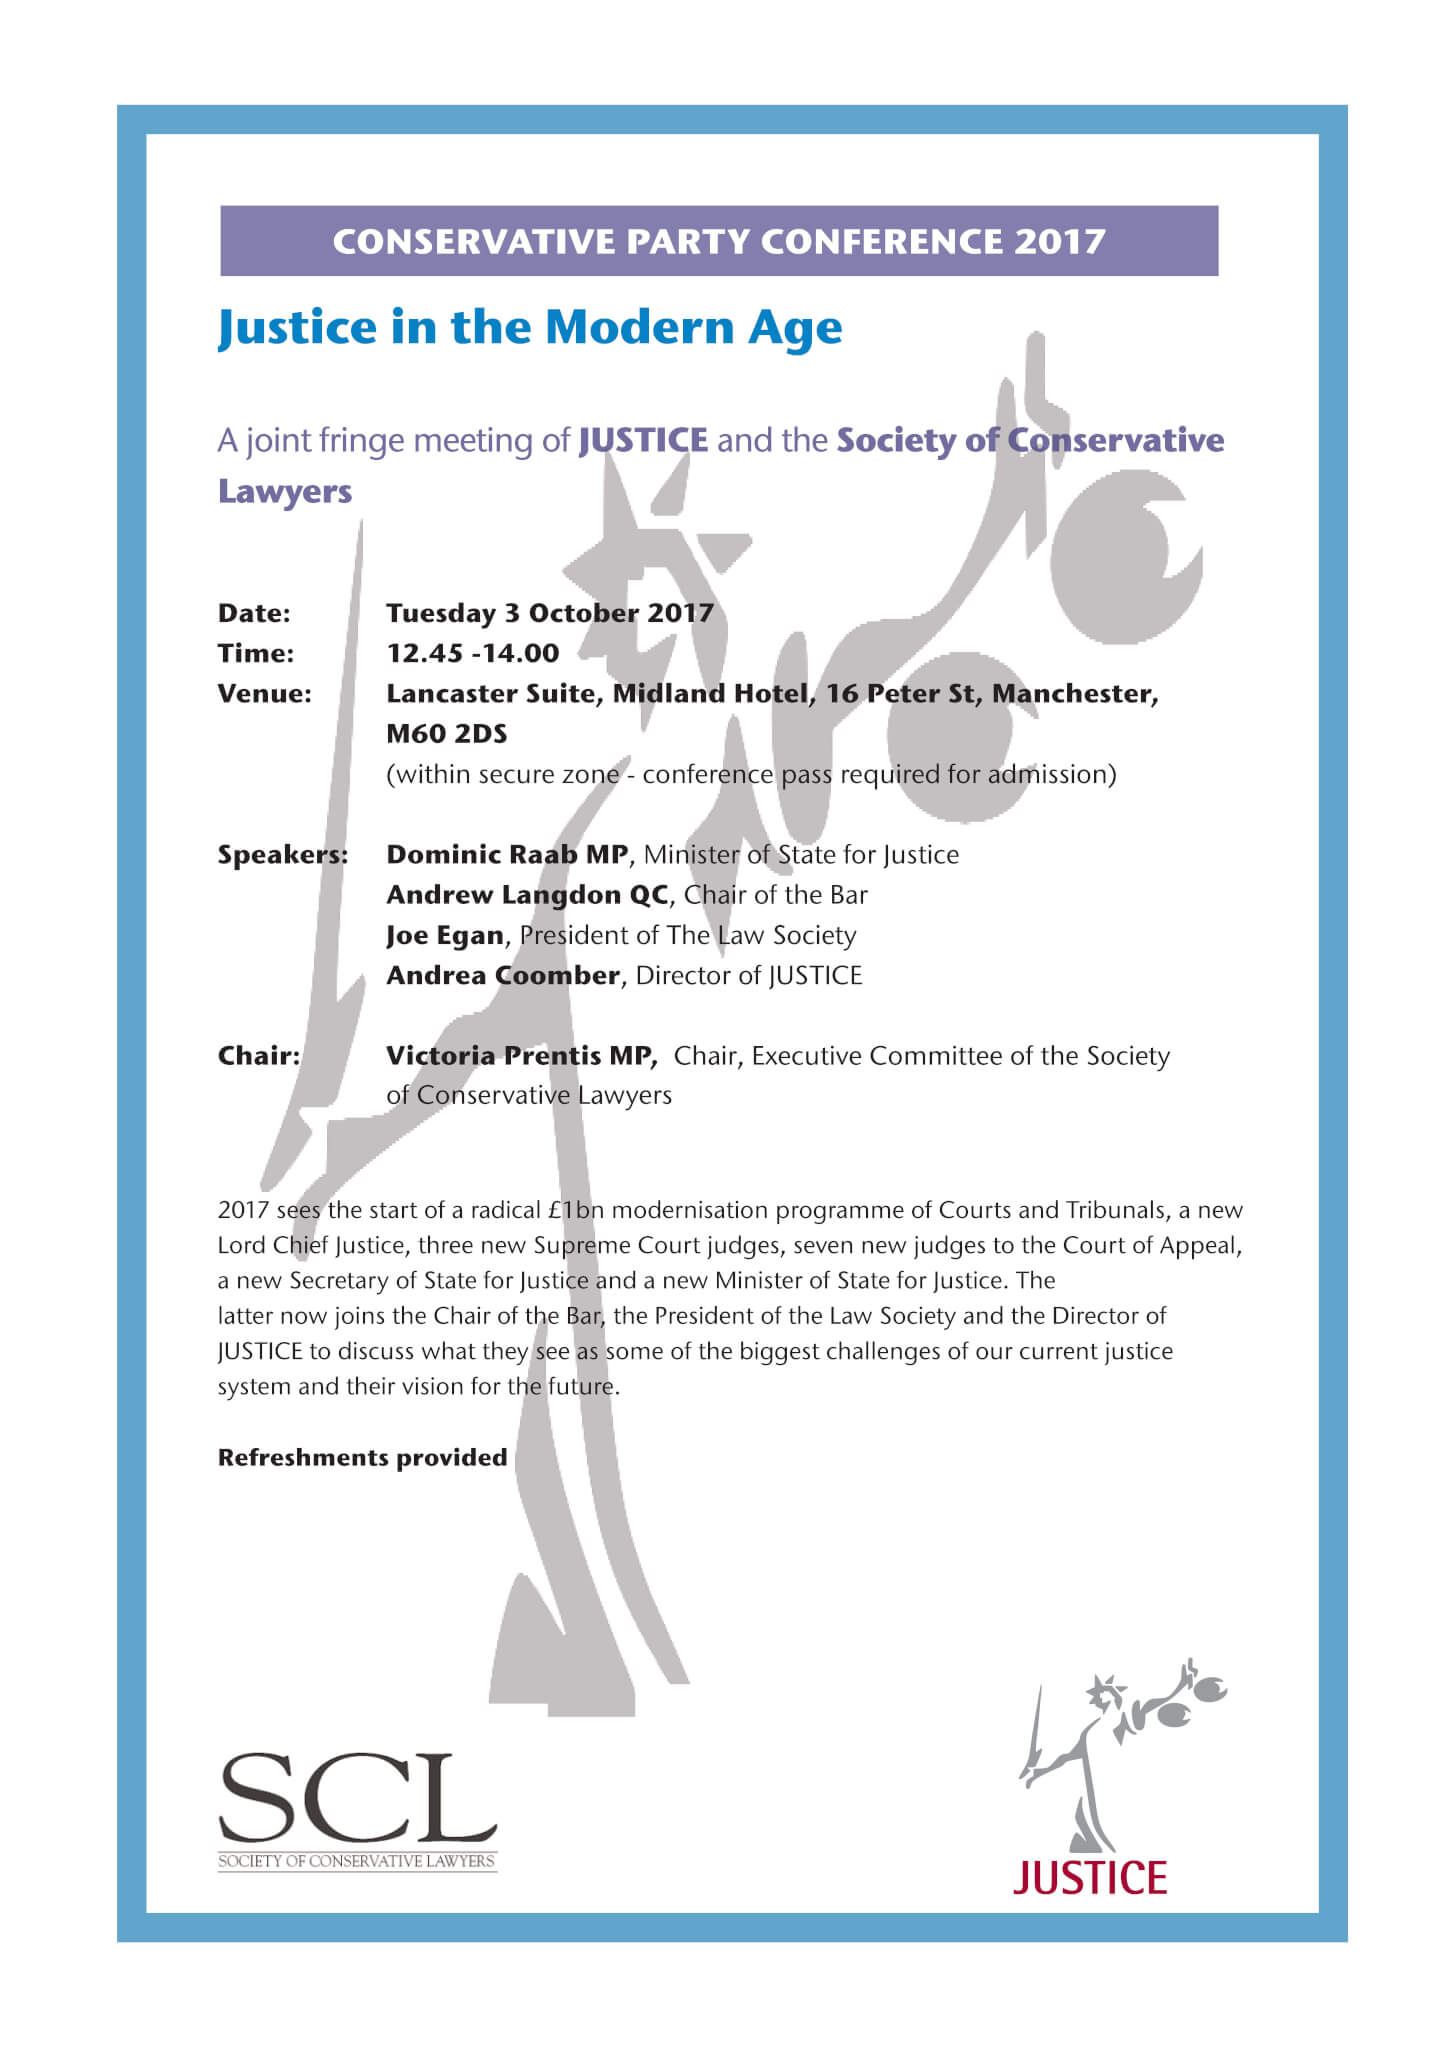 Justice in the modern age flyer